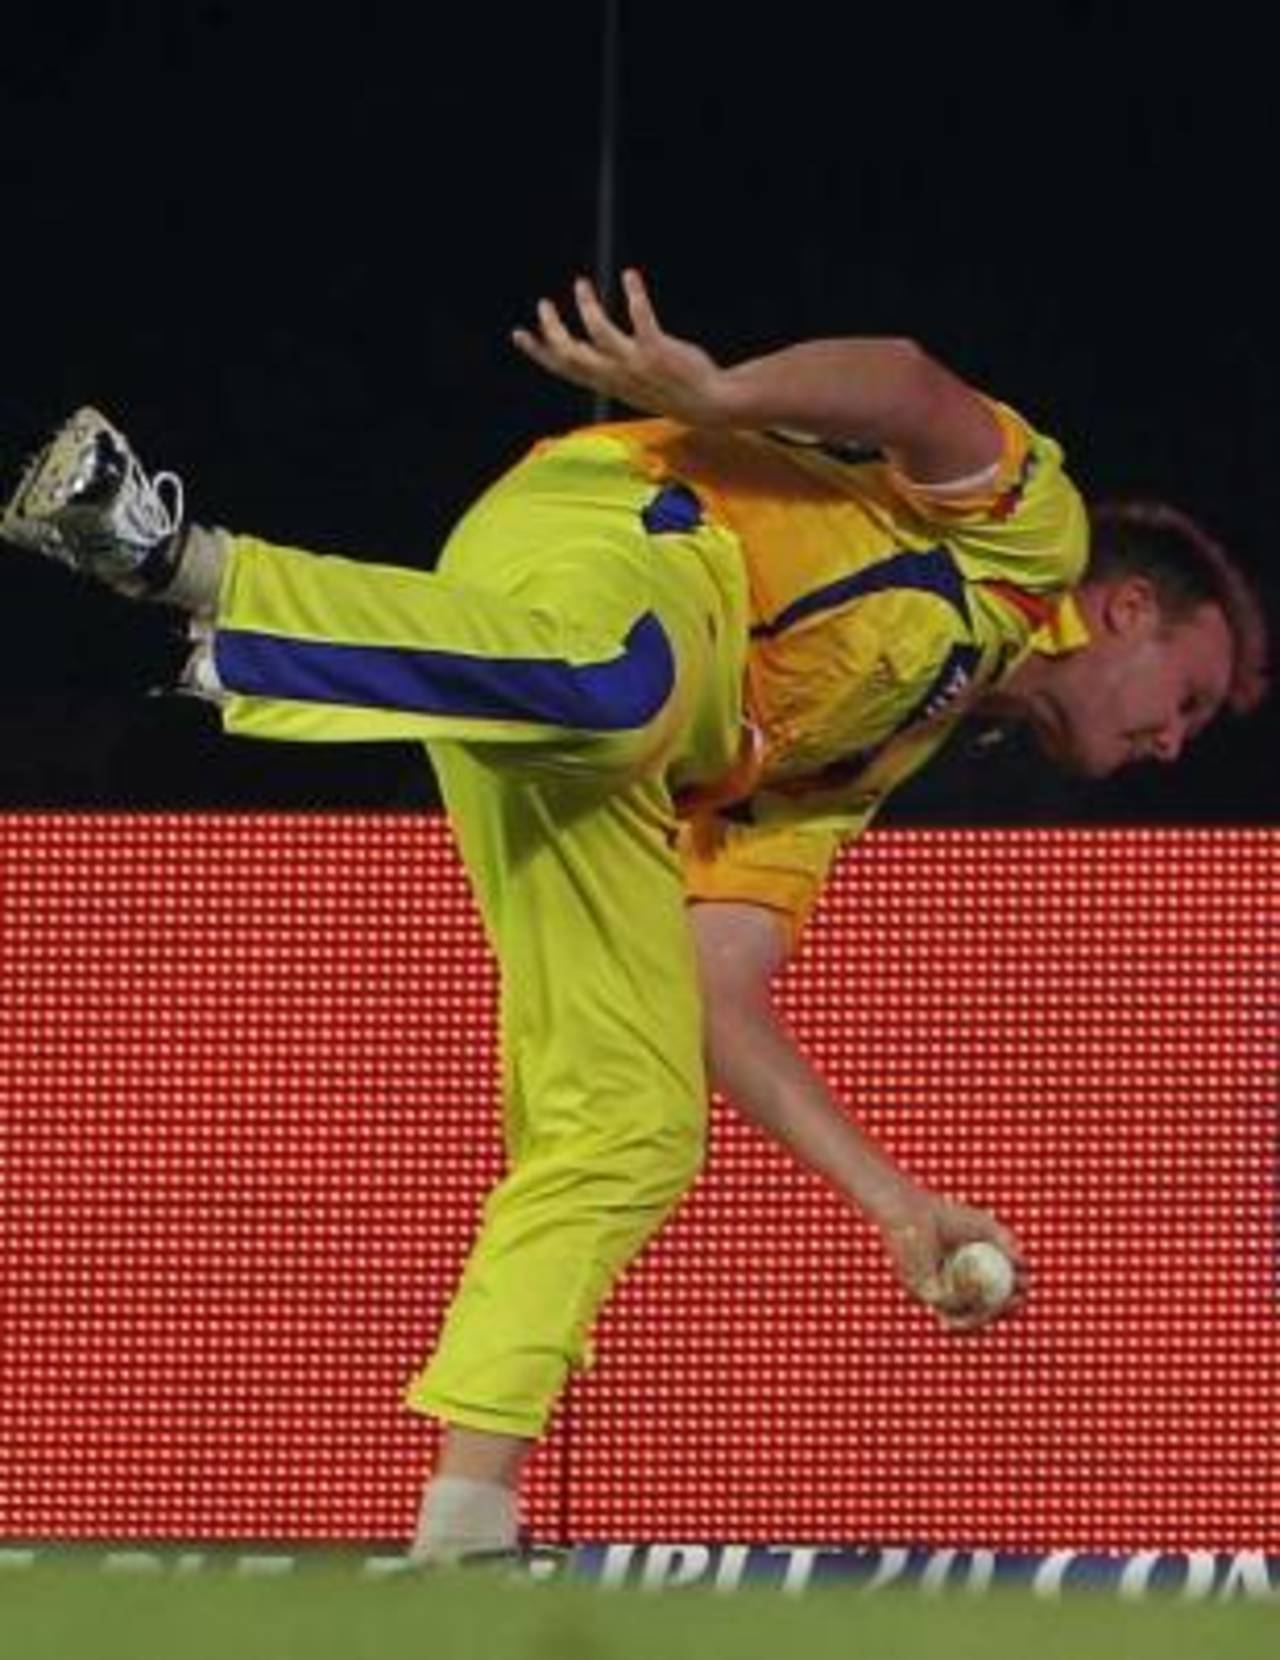 Doug Bollinger in the process of pouching a stunning catch, Chennai Super Kings v Rajasthan Royals, IPL, Chennai, April 3, 2010